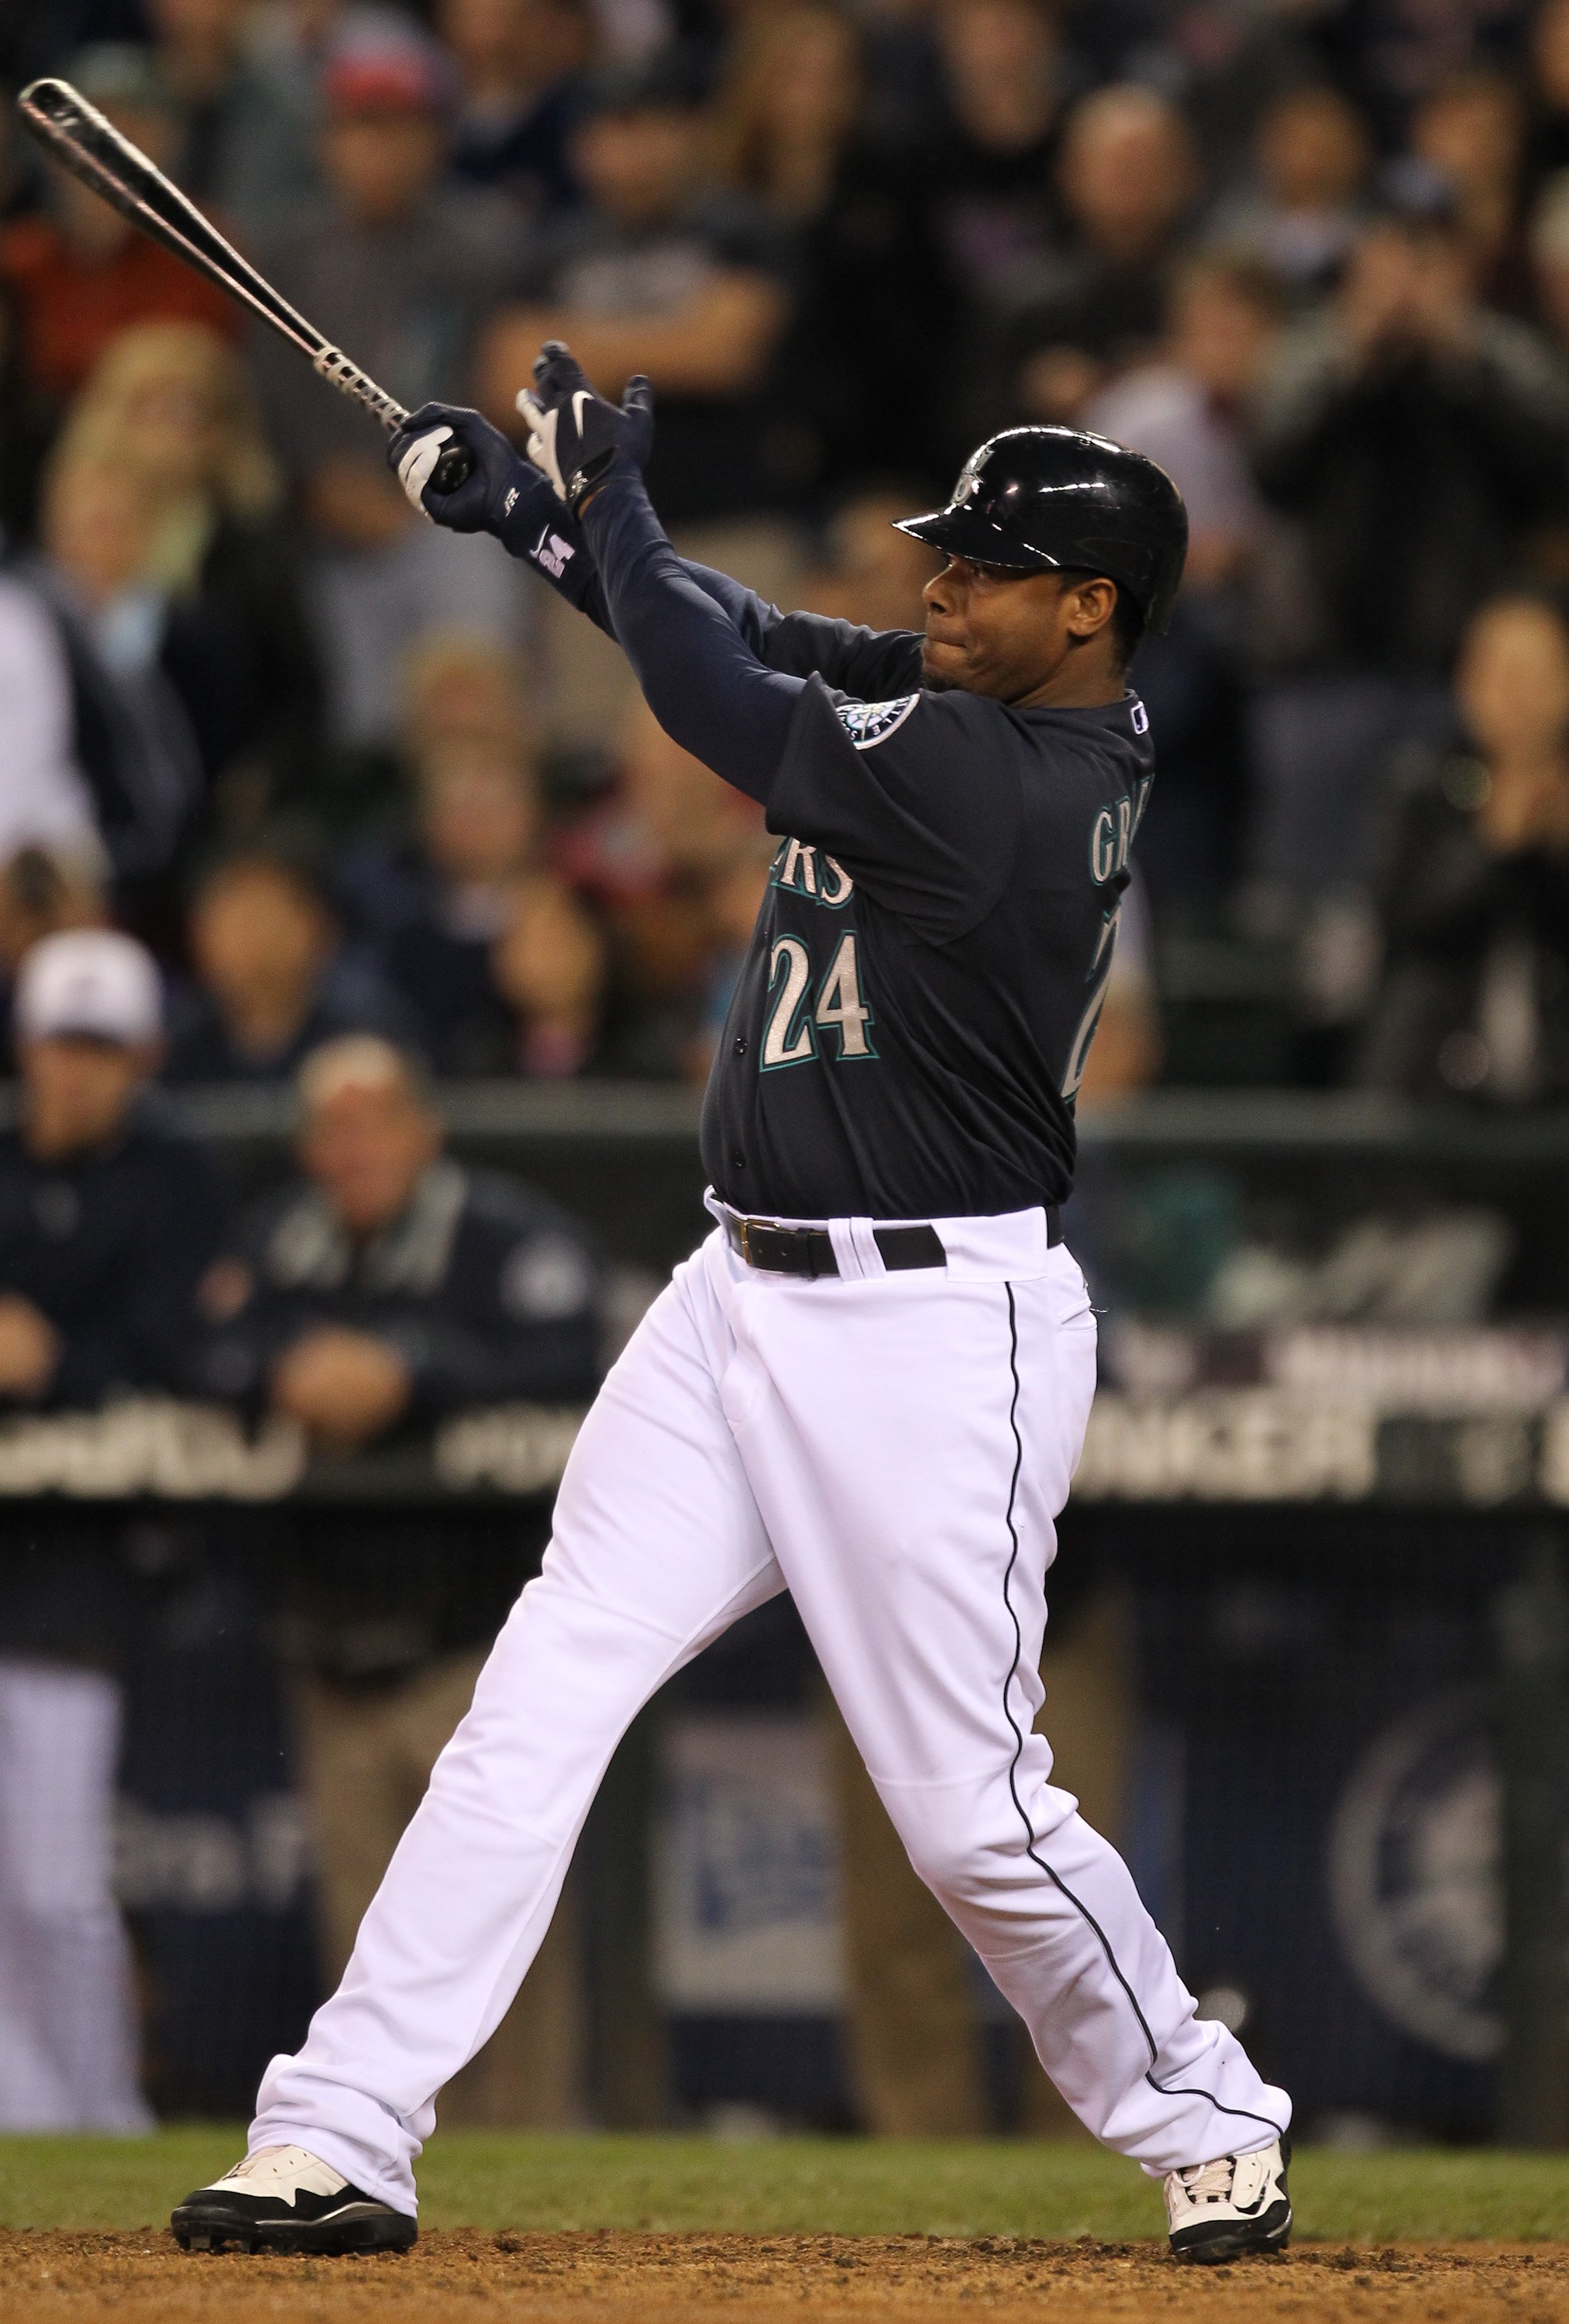 SEATTLE - MAY 31:  Ken Griffey Jr. #24 of the Seattle Mariners bats against the Minnesota Twins at Safeco Field on May 31, 2010 in Seattle, Washington. (Photo by Otto Greule Jr/Getty Images)